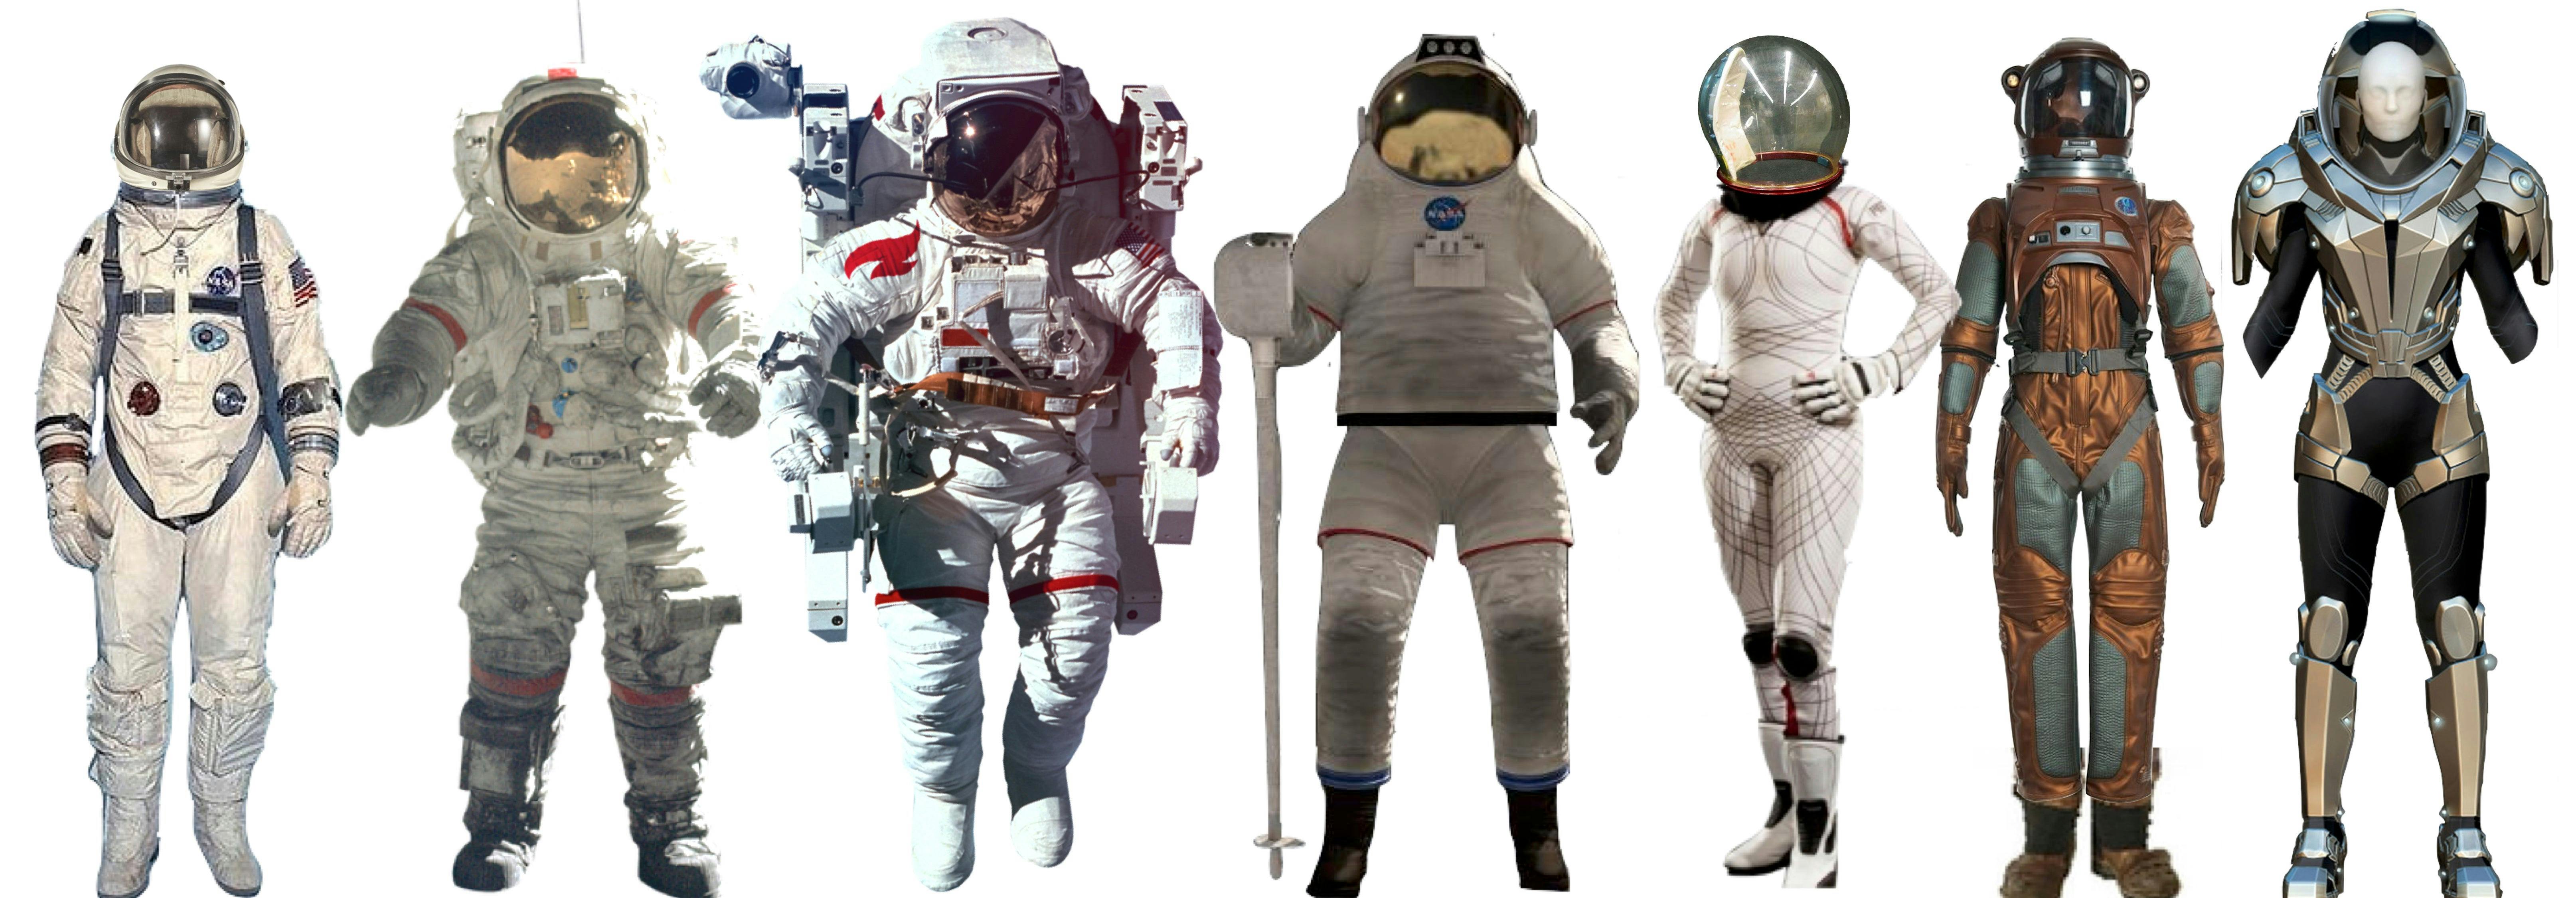 Evolution of real-world space suits and they progress into the Star Trek universe.